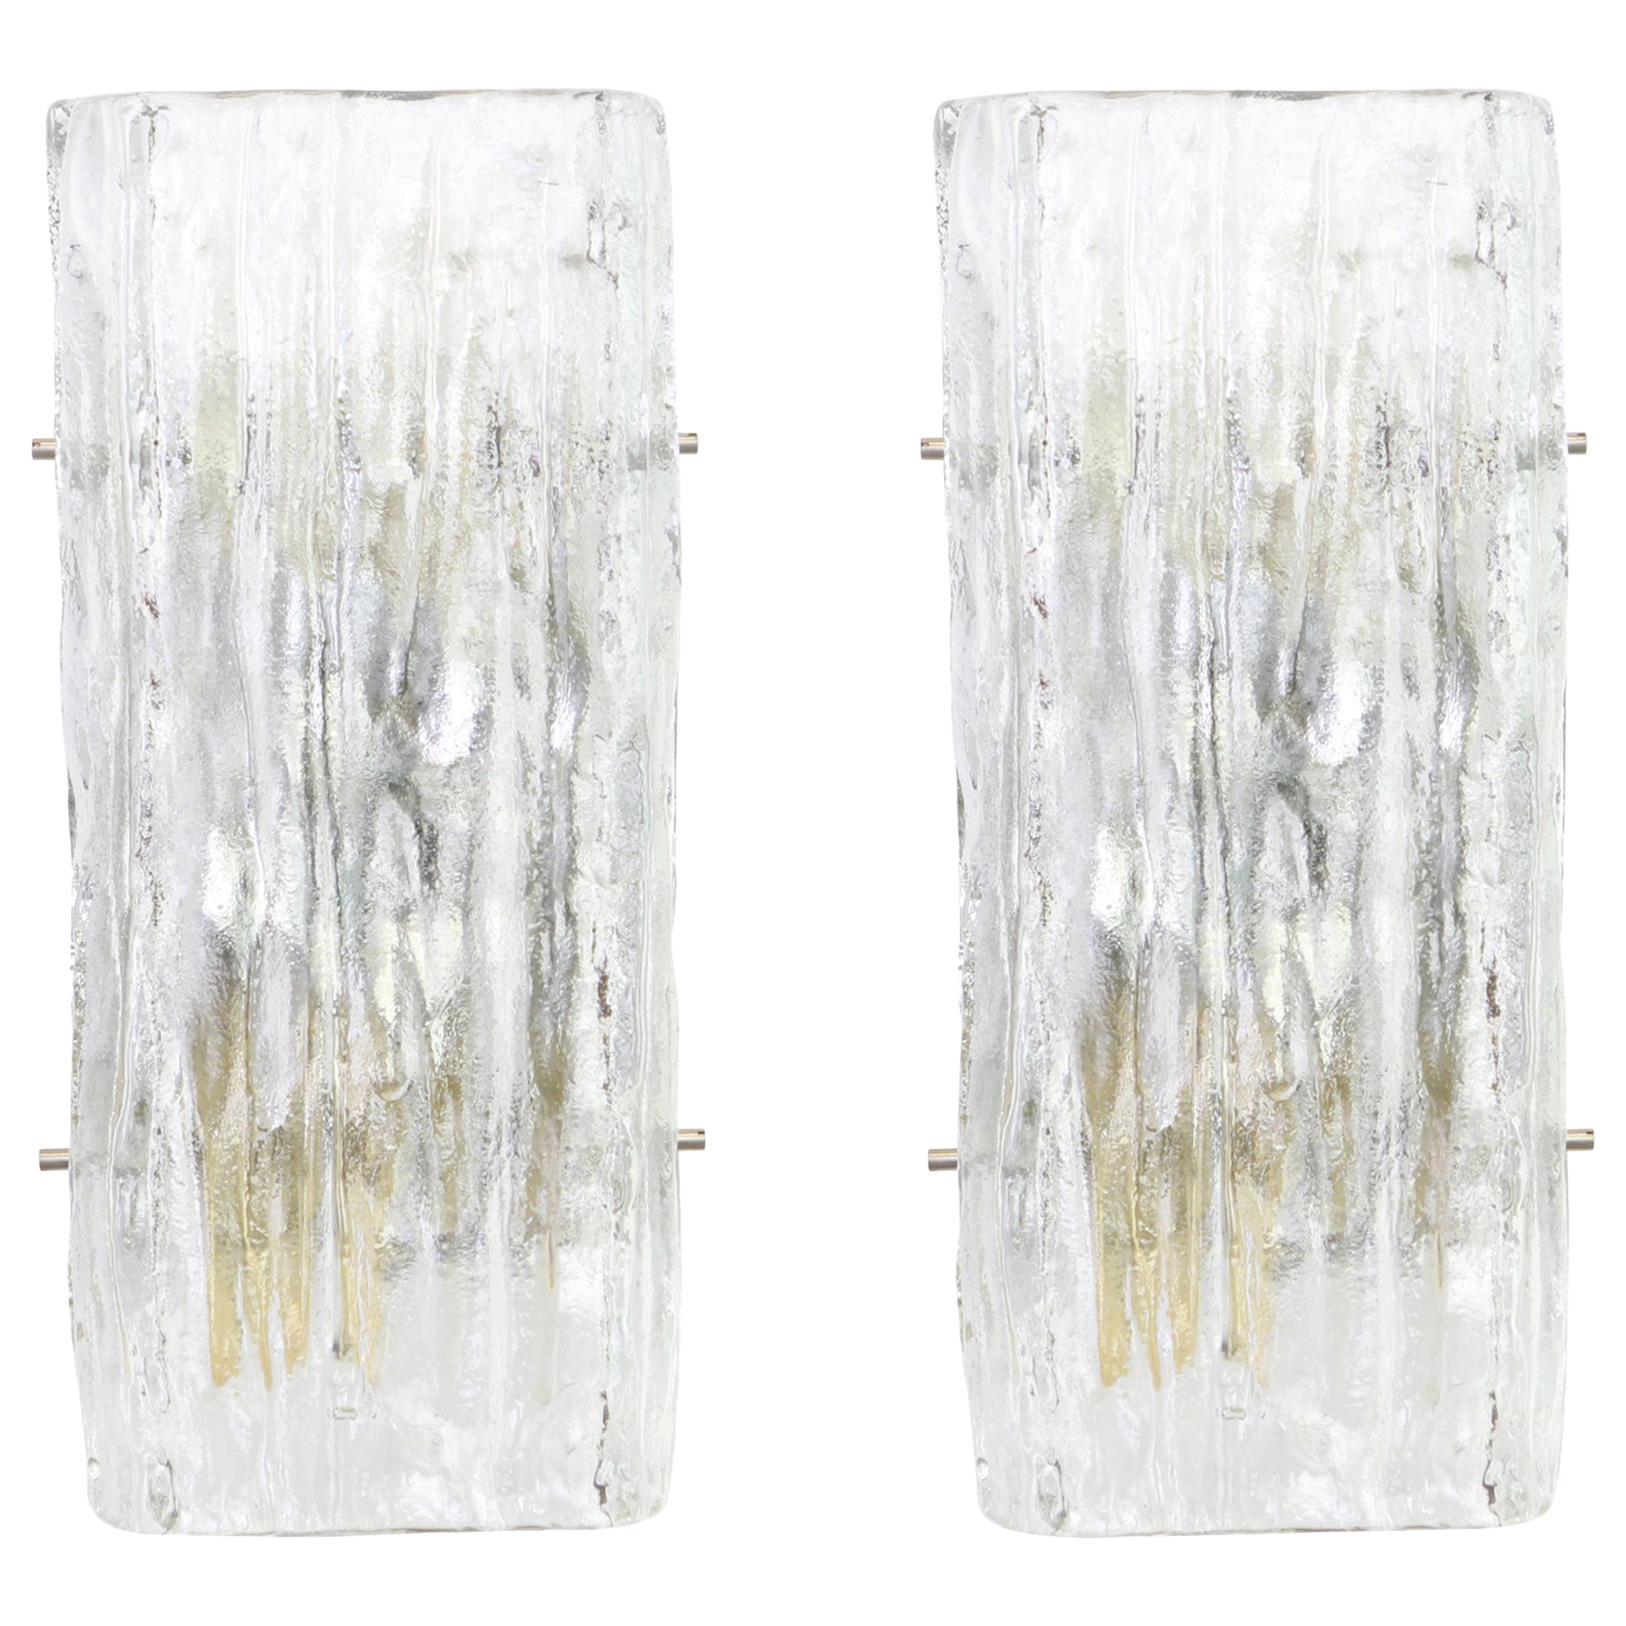 Wonderful pair of midcentury wall sconces with ice glass, made by Kalmar, Austria, manufactured, circa 1960-1969.
High quality and in very good condition. Cleaned, well-wired and ready to use.  

The fixture requires 2 x E14 Standard bulbs with